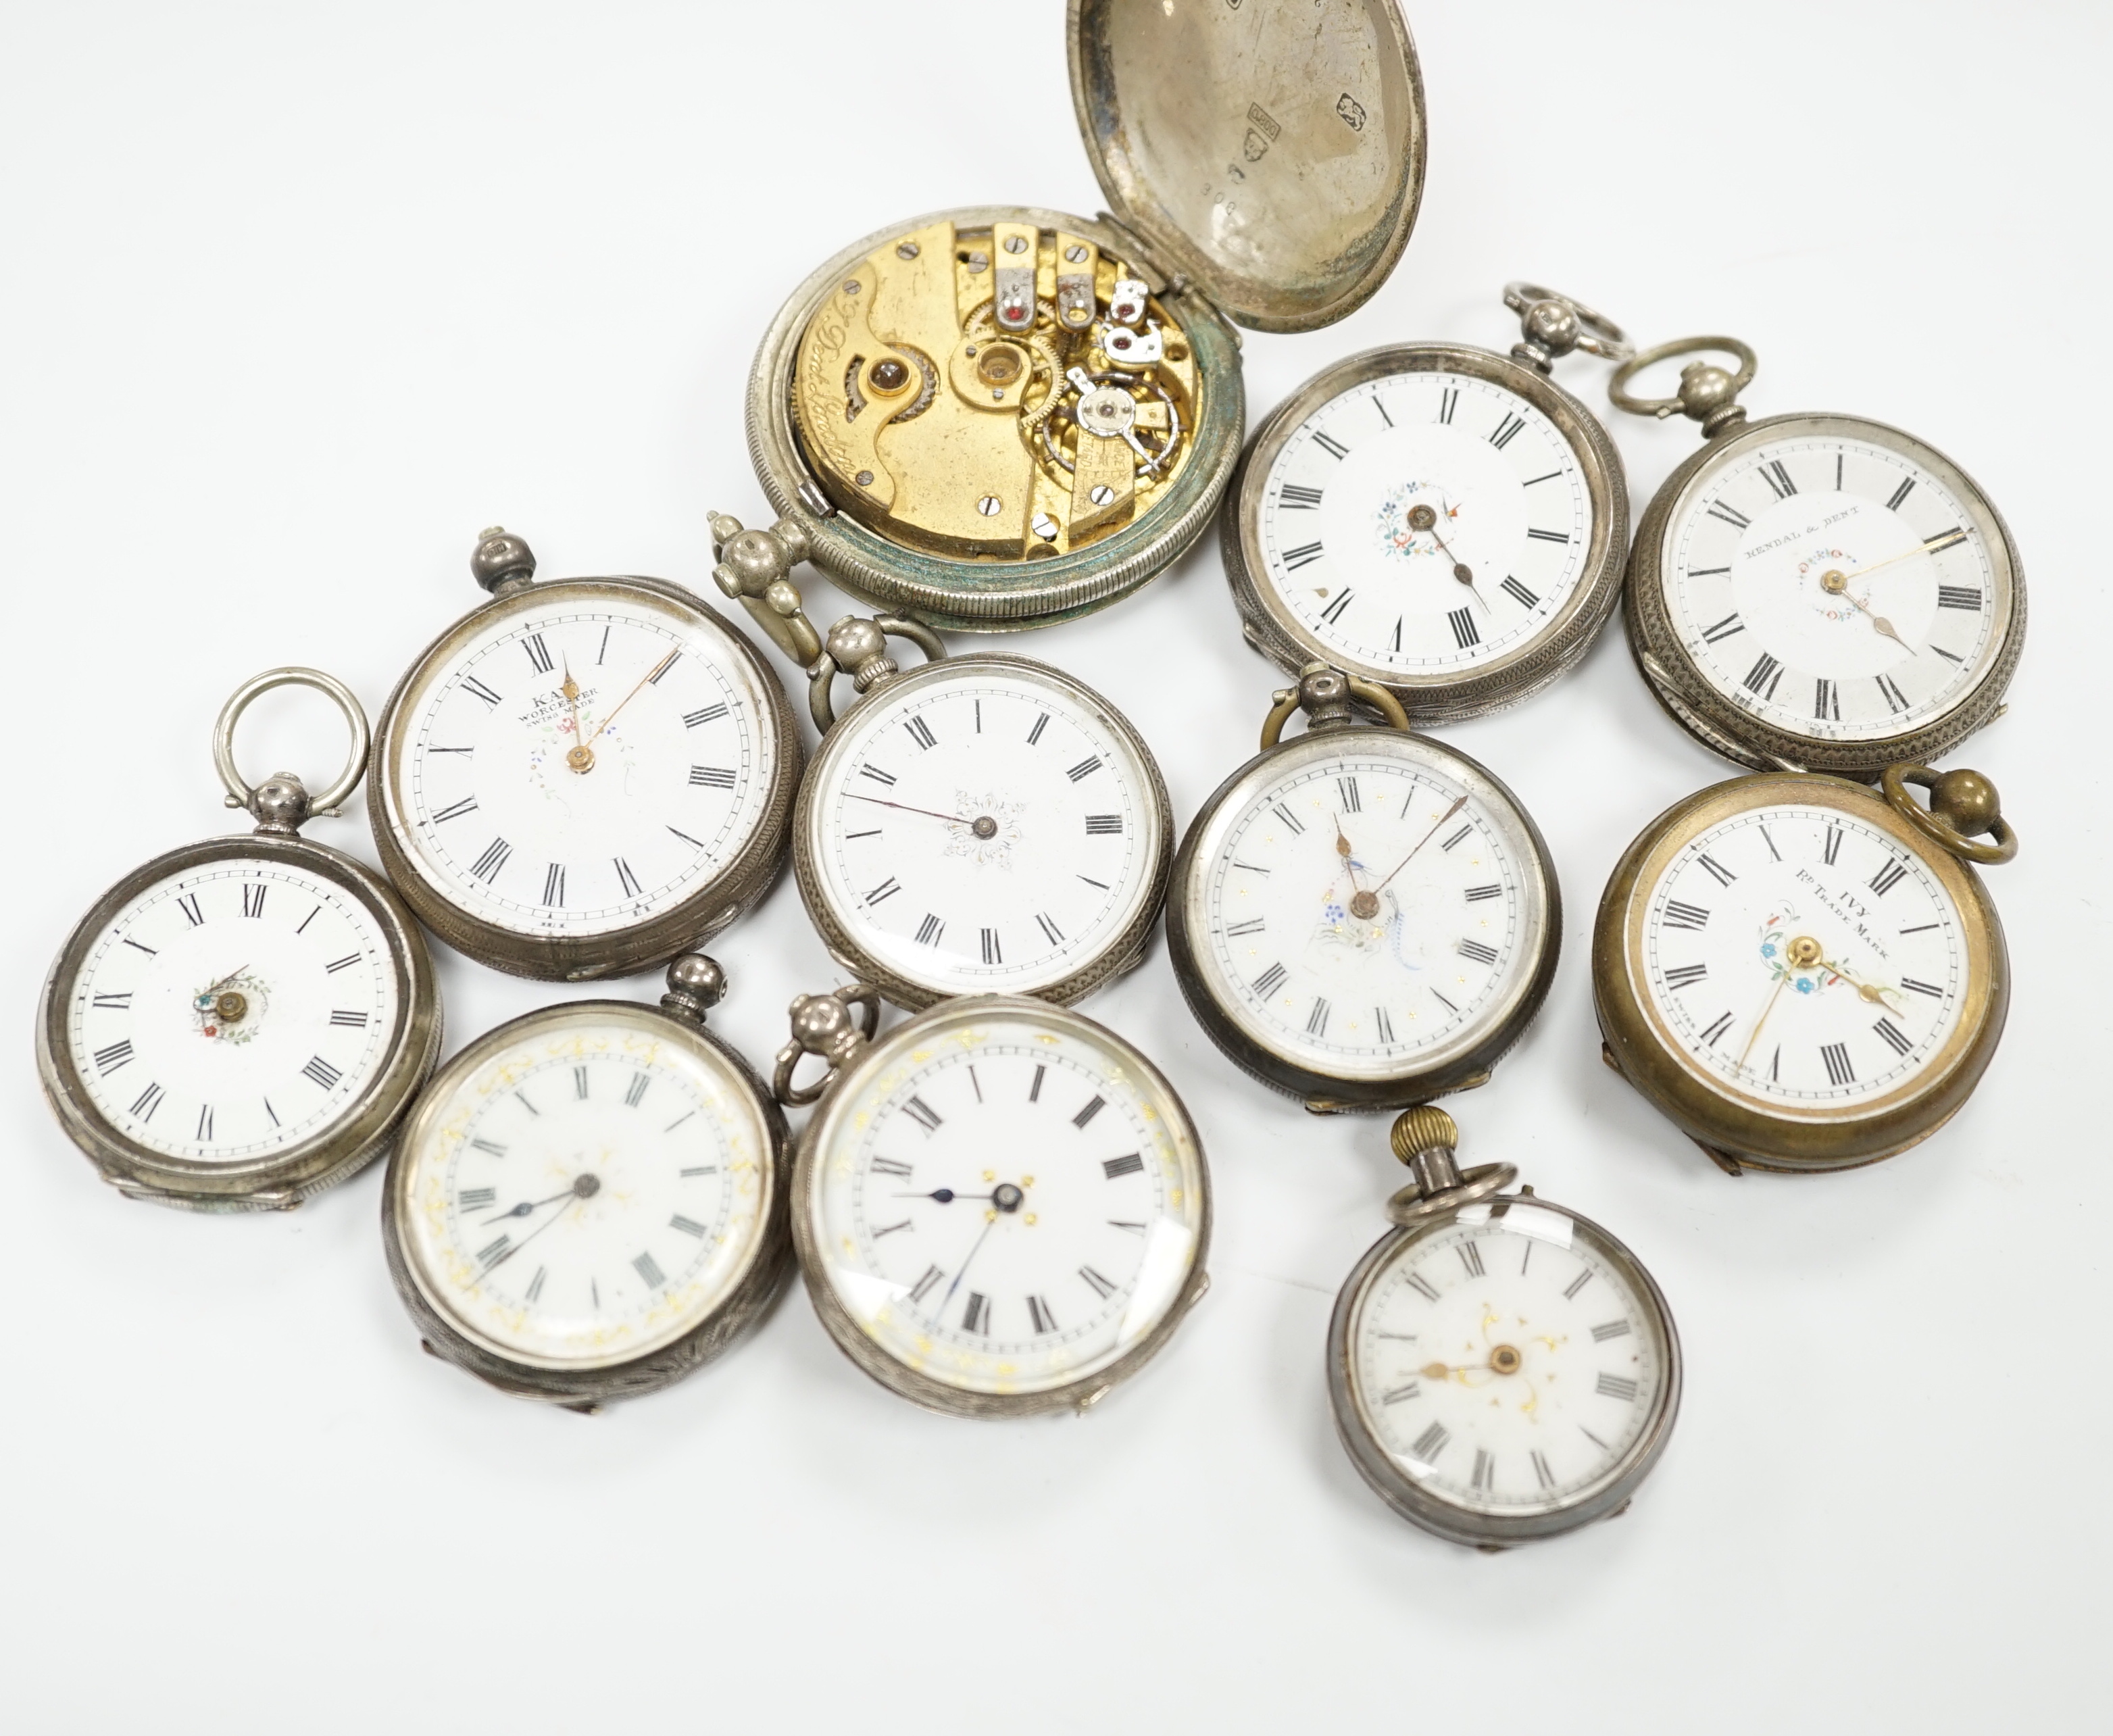 A large quantity of assorted wrist and pocket watch parts and movements, together with assorted fob watches including silver.